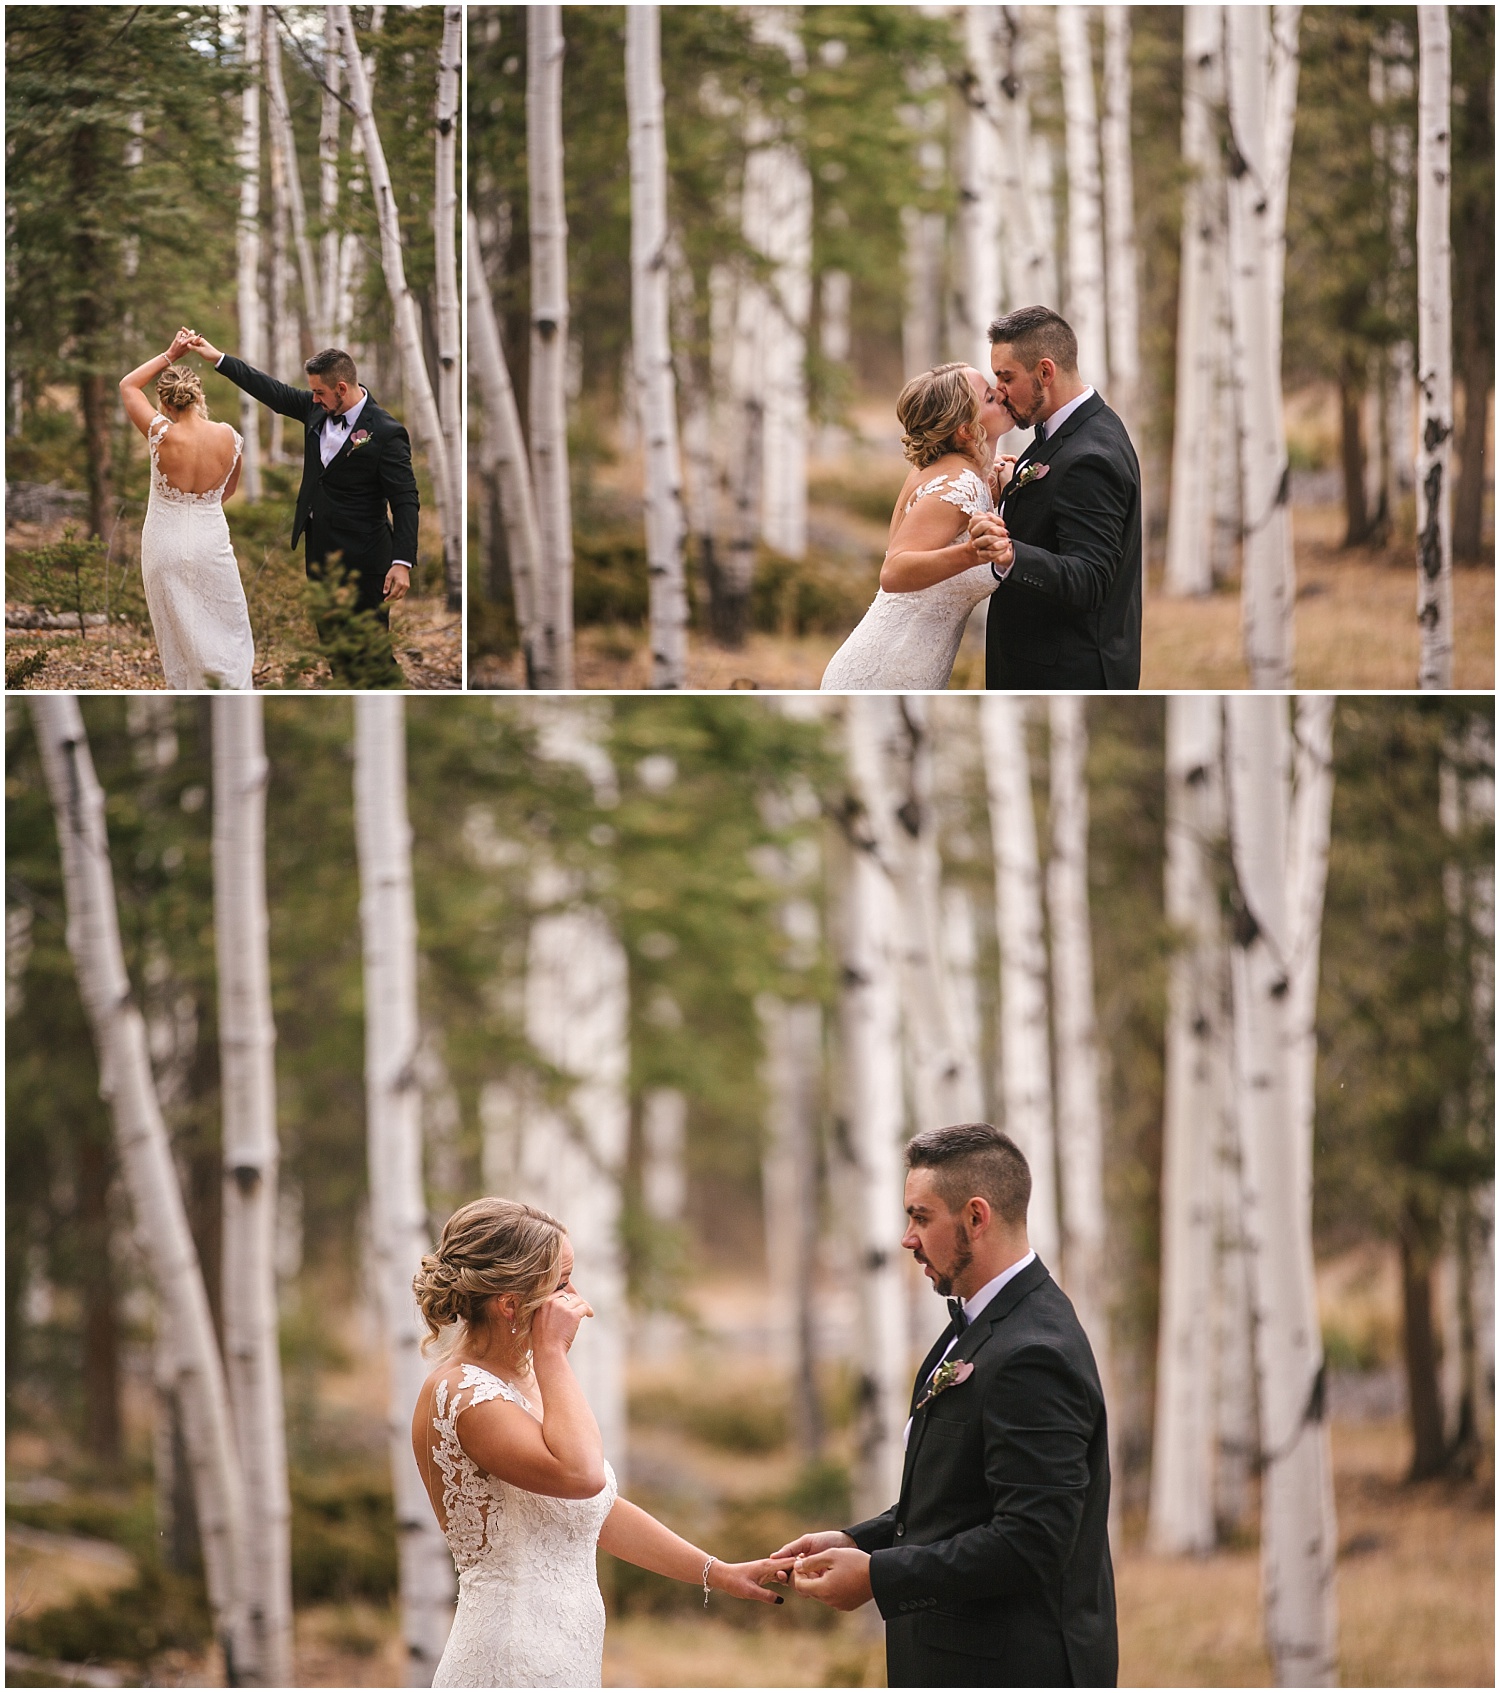 Bride and groom portraits in the aspen trees in Woodland Park Colorado